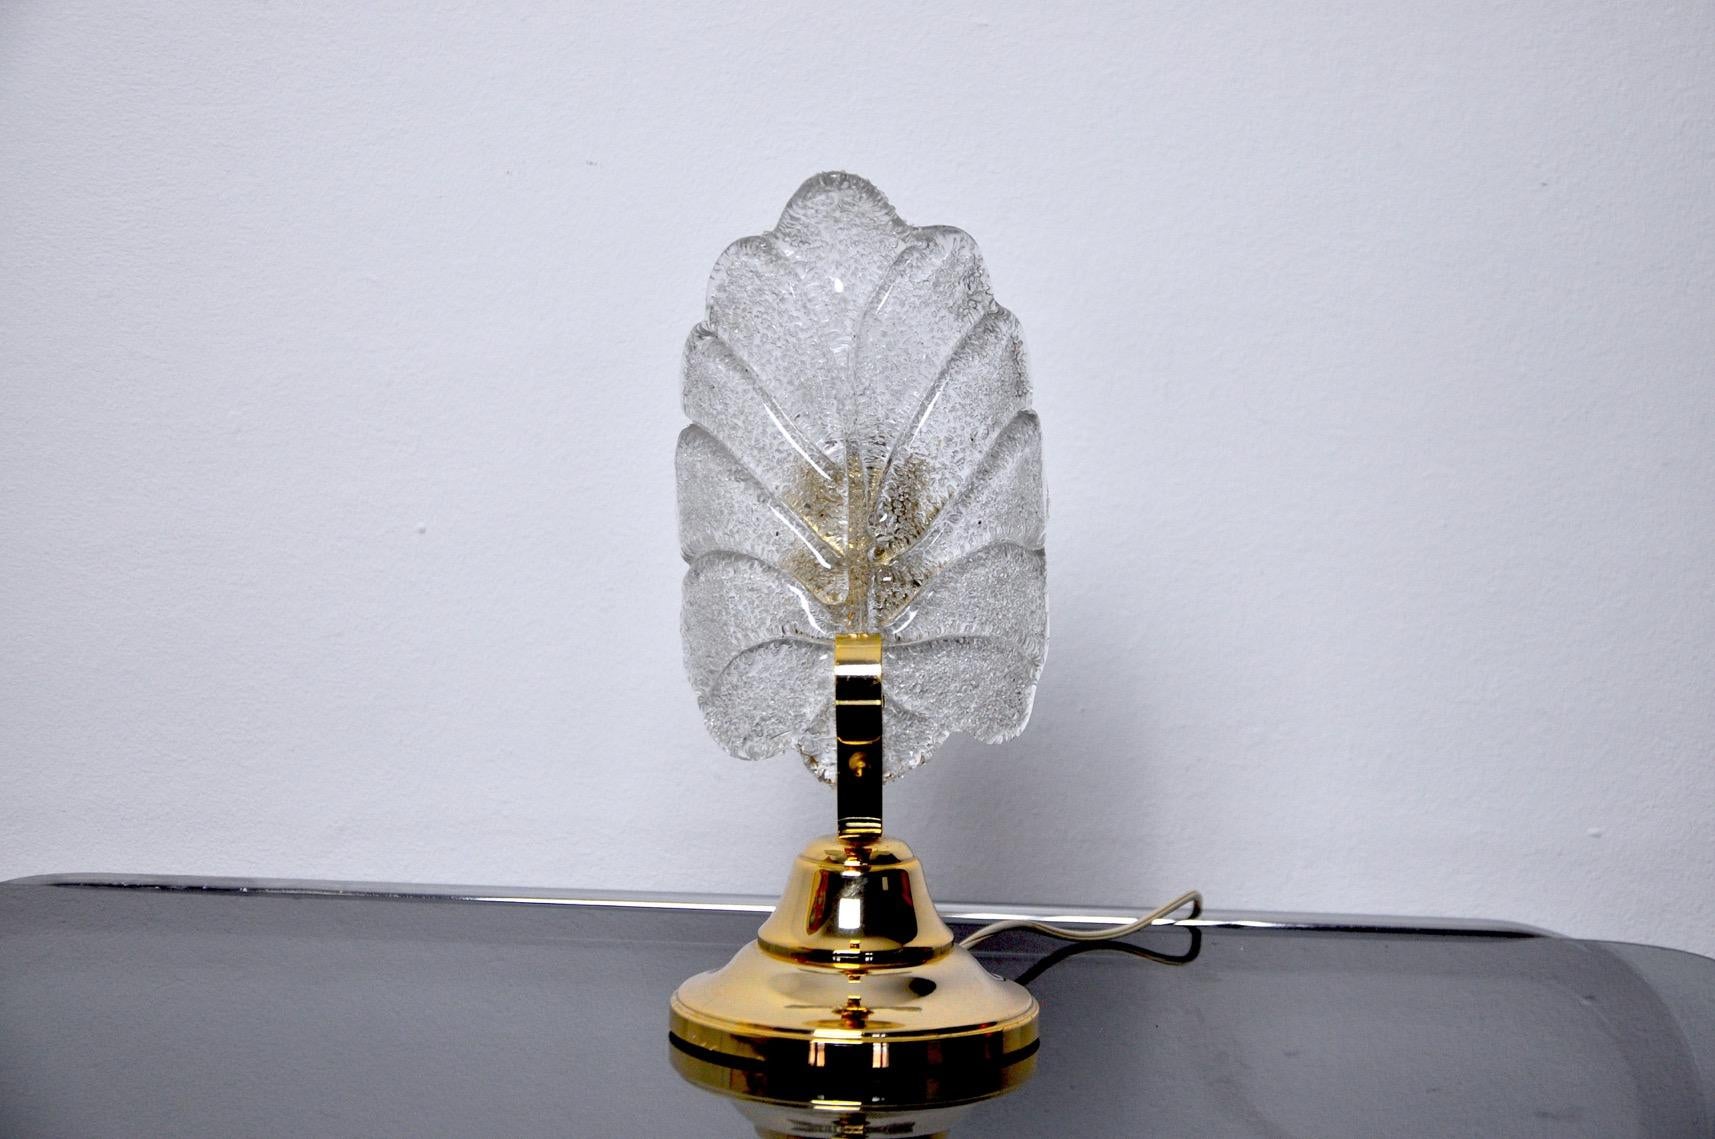 Very nice table lamp by Carl Fagerlund for Lyfa from the 60s. The lamp is made of brass and leaf-shaped glass. The diffused light is soft and harmonious, perfect for illuminating your interior. Mark of time consistent with the age of the objects.